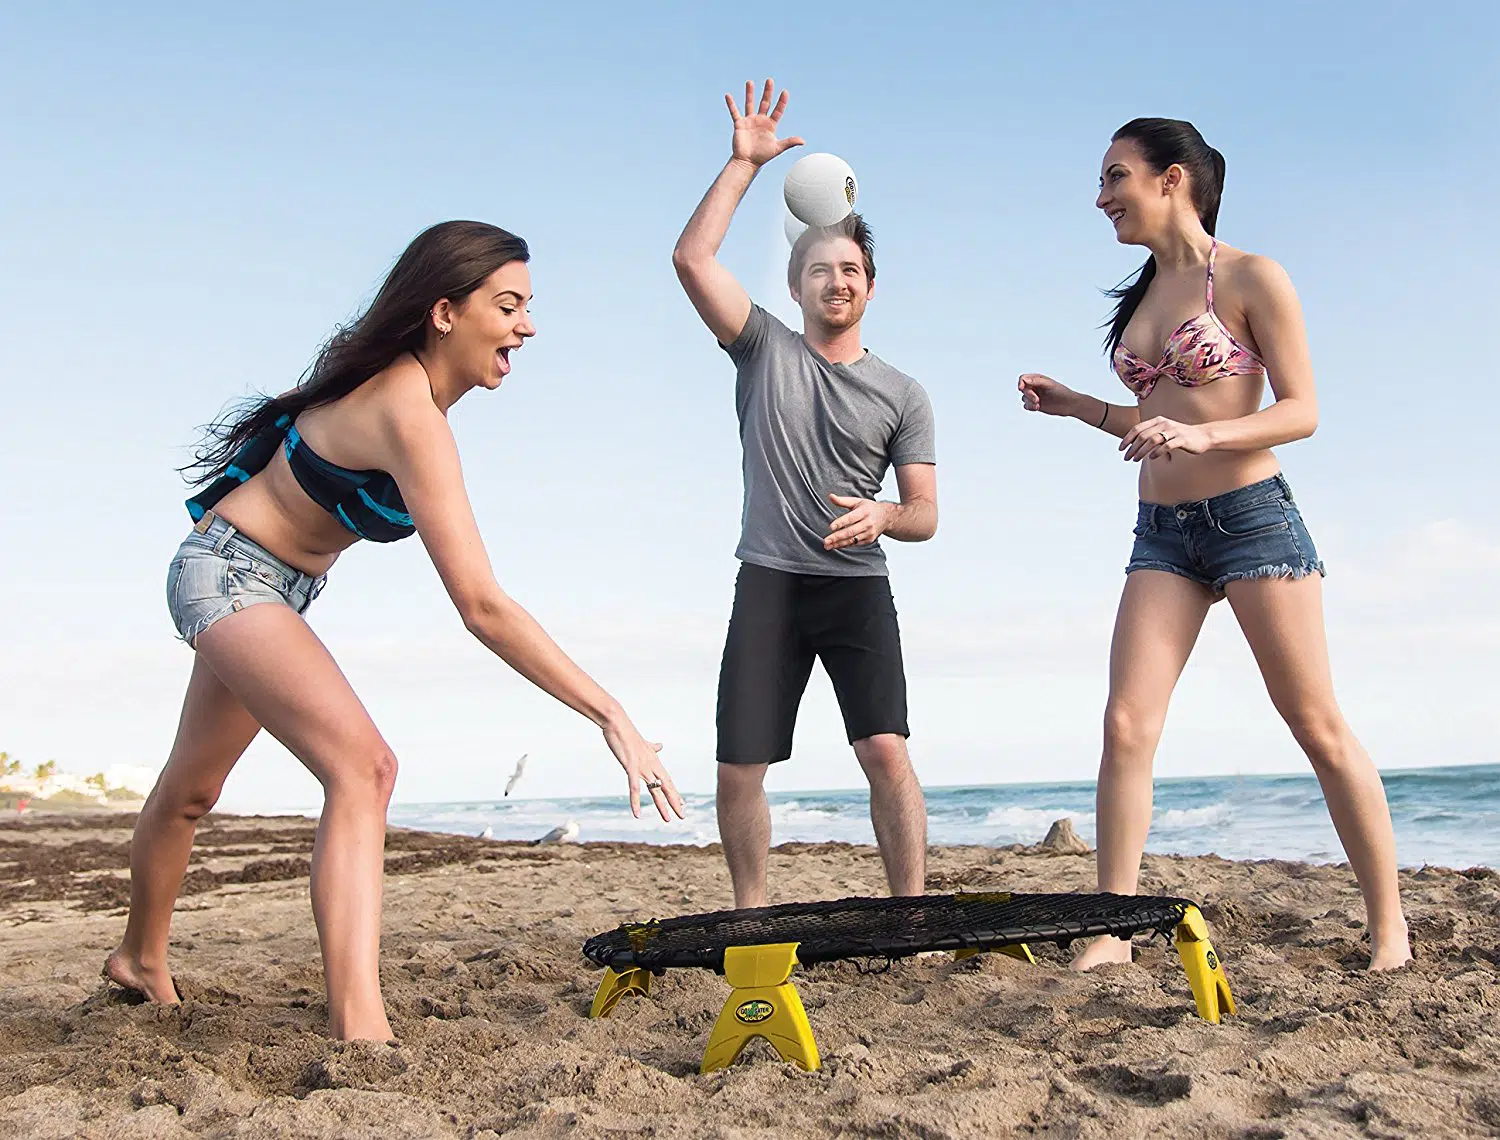 spikeball-beach-game-for-adults